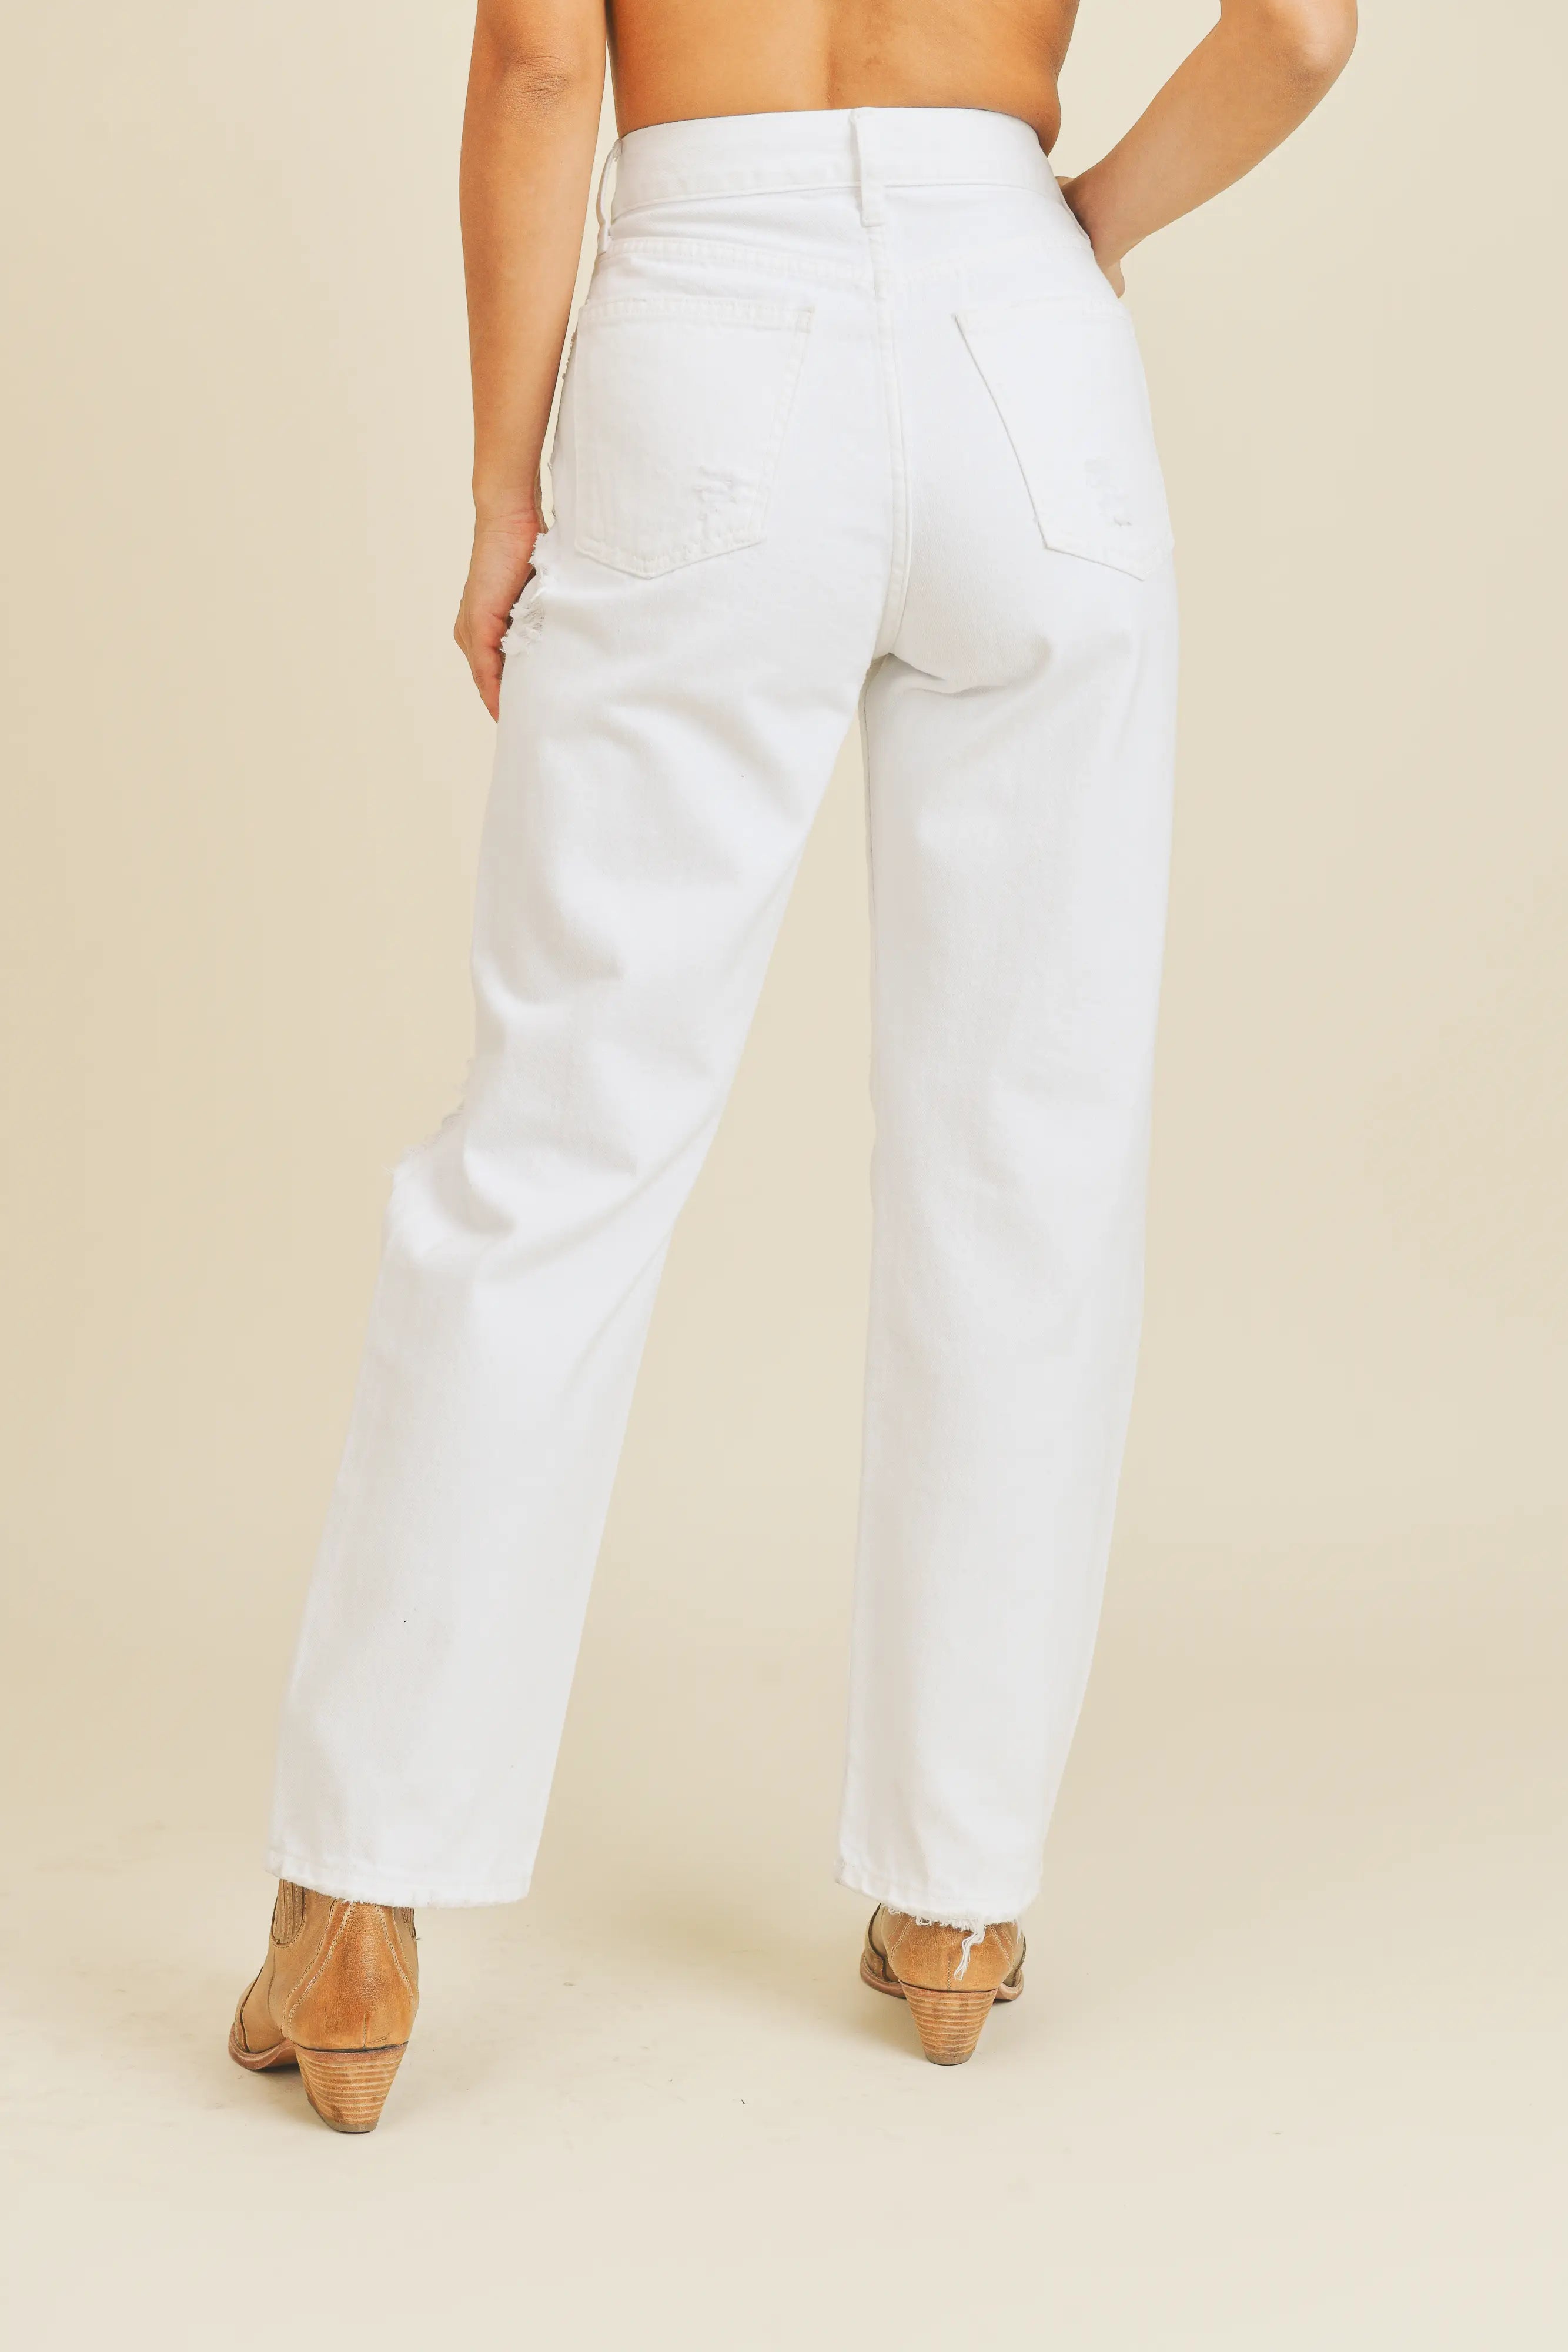 White High Rise Dad Jeans - Proper